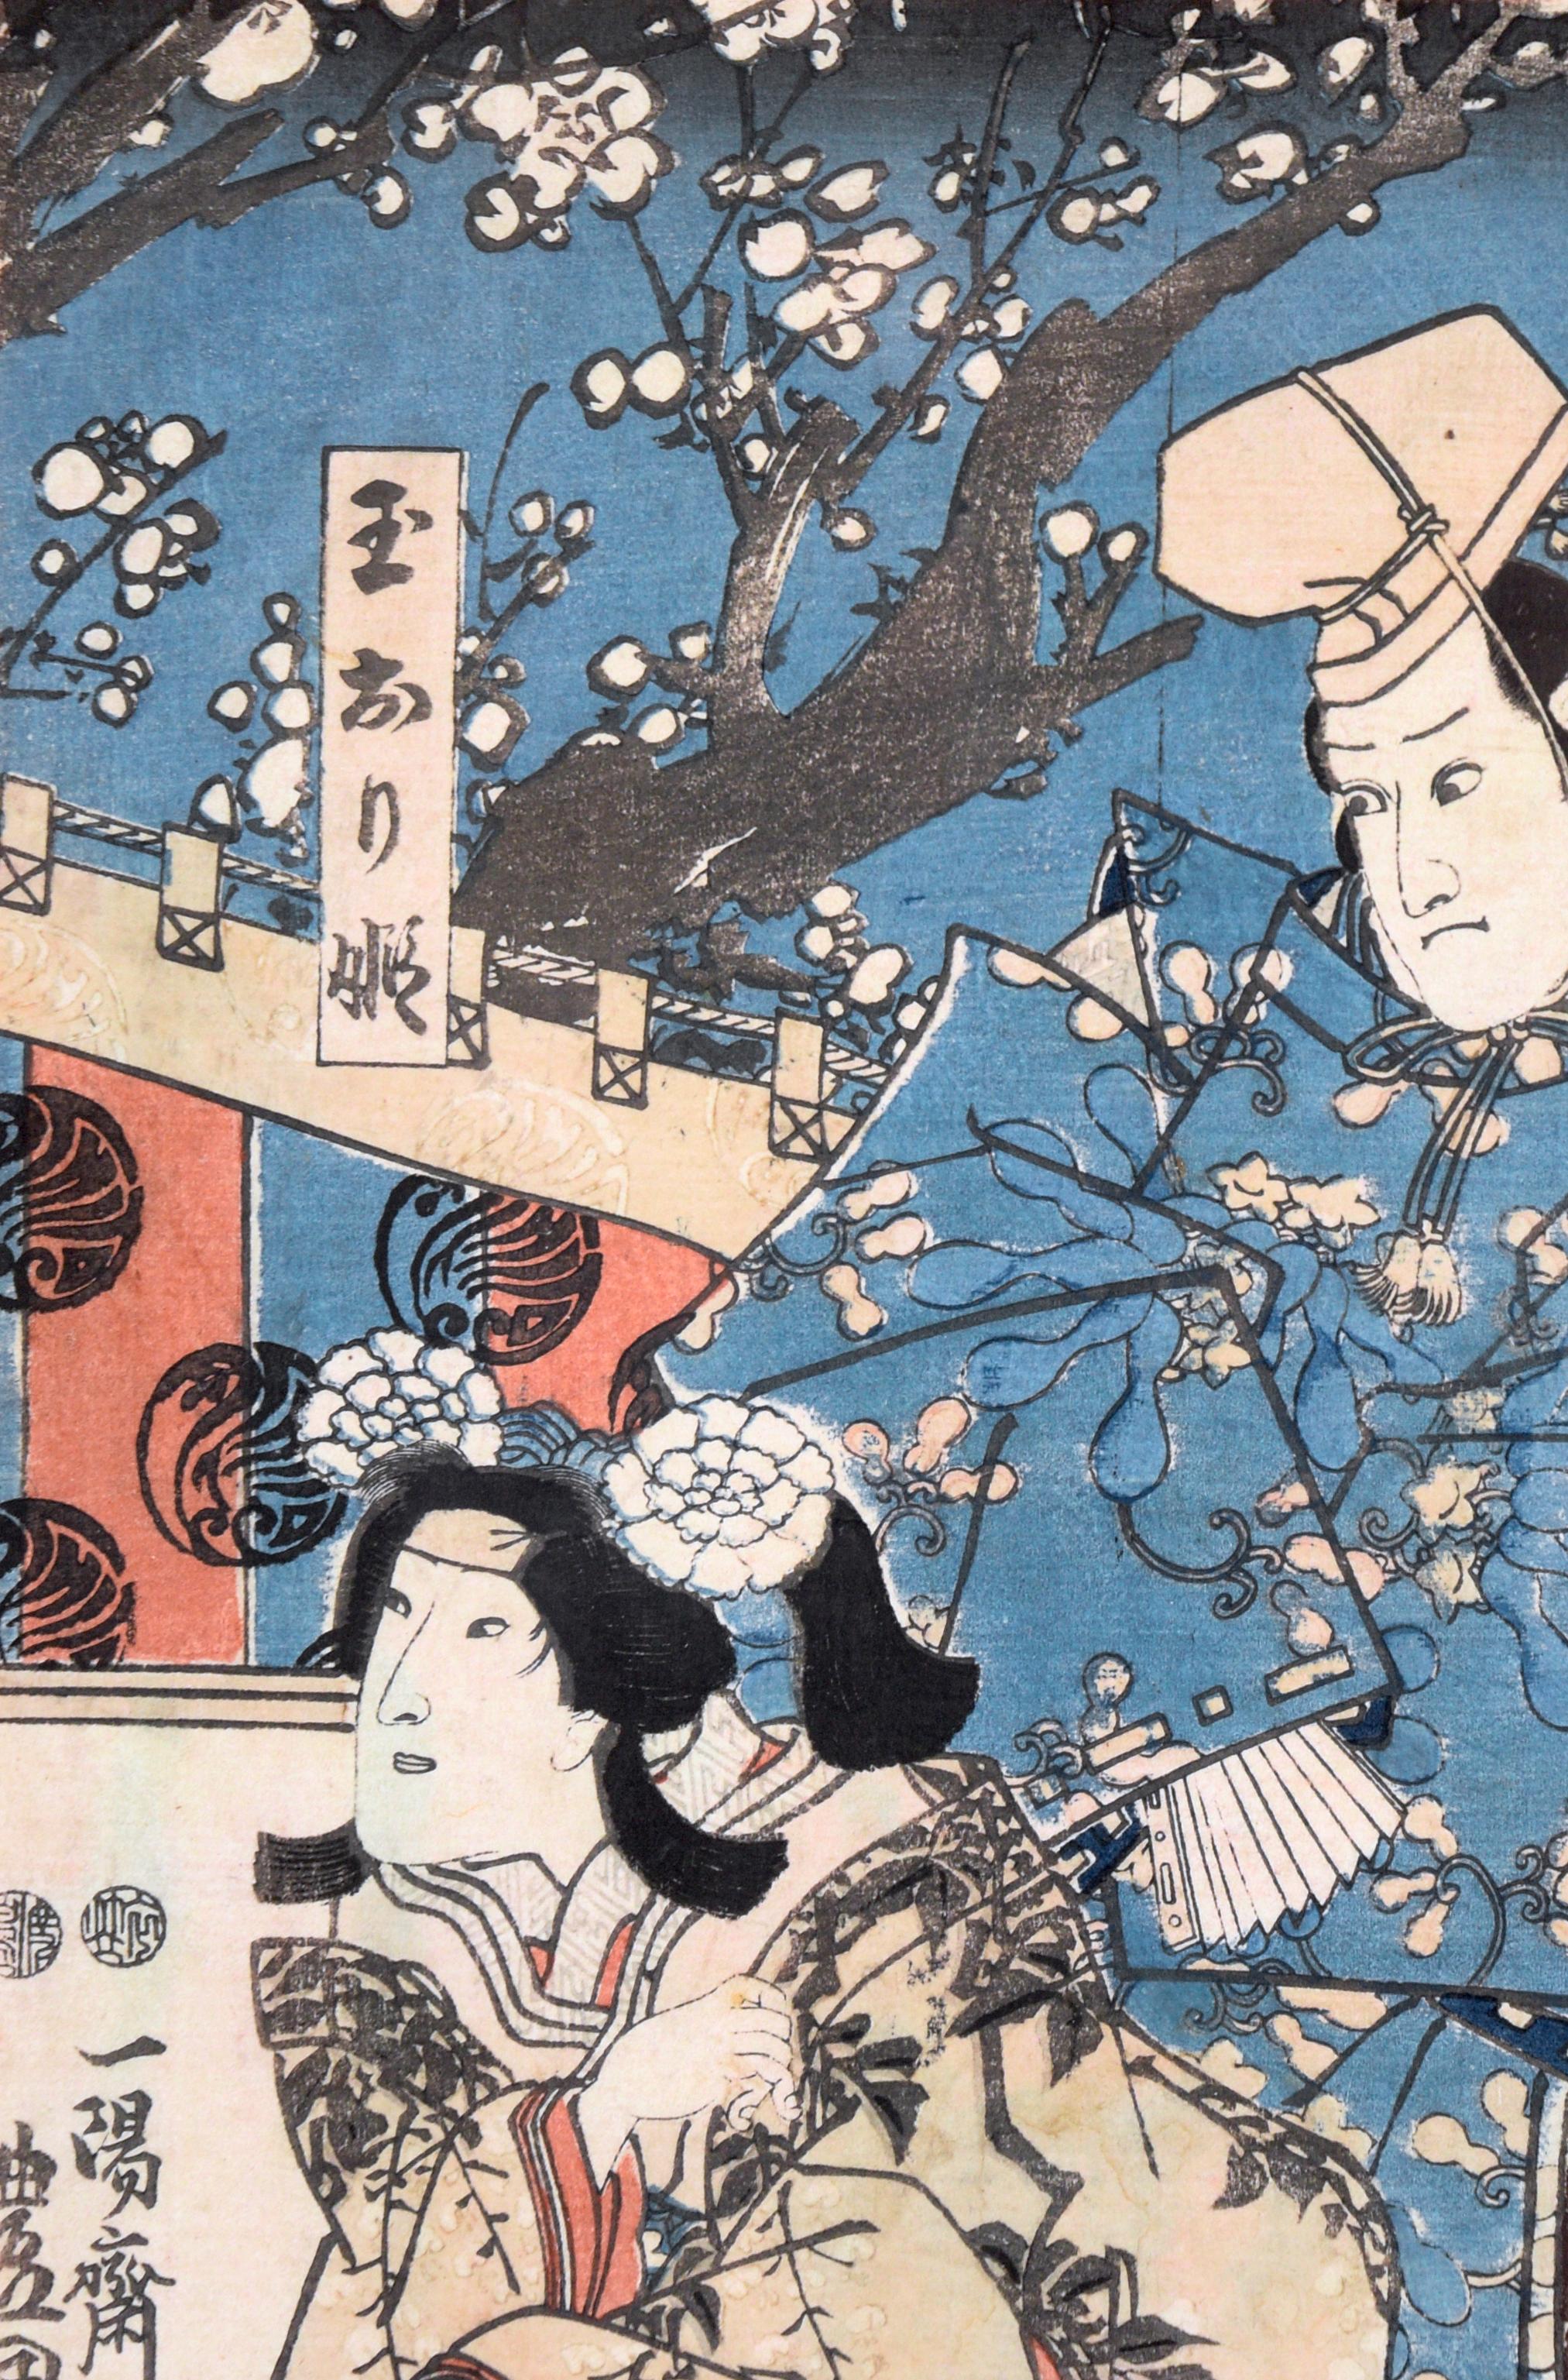 Two Actors - Japanese Woodblock by Toyohara Chikanobu (豊原周延, 1838–1912), better known to his contemporaries as Yōshū Chikanobu (楊洲周延).
Colorful and expressive court scene. Two actors, both wearing extravagant kimonos, one kneeling facing left, while